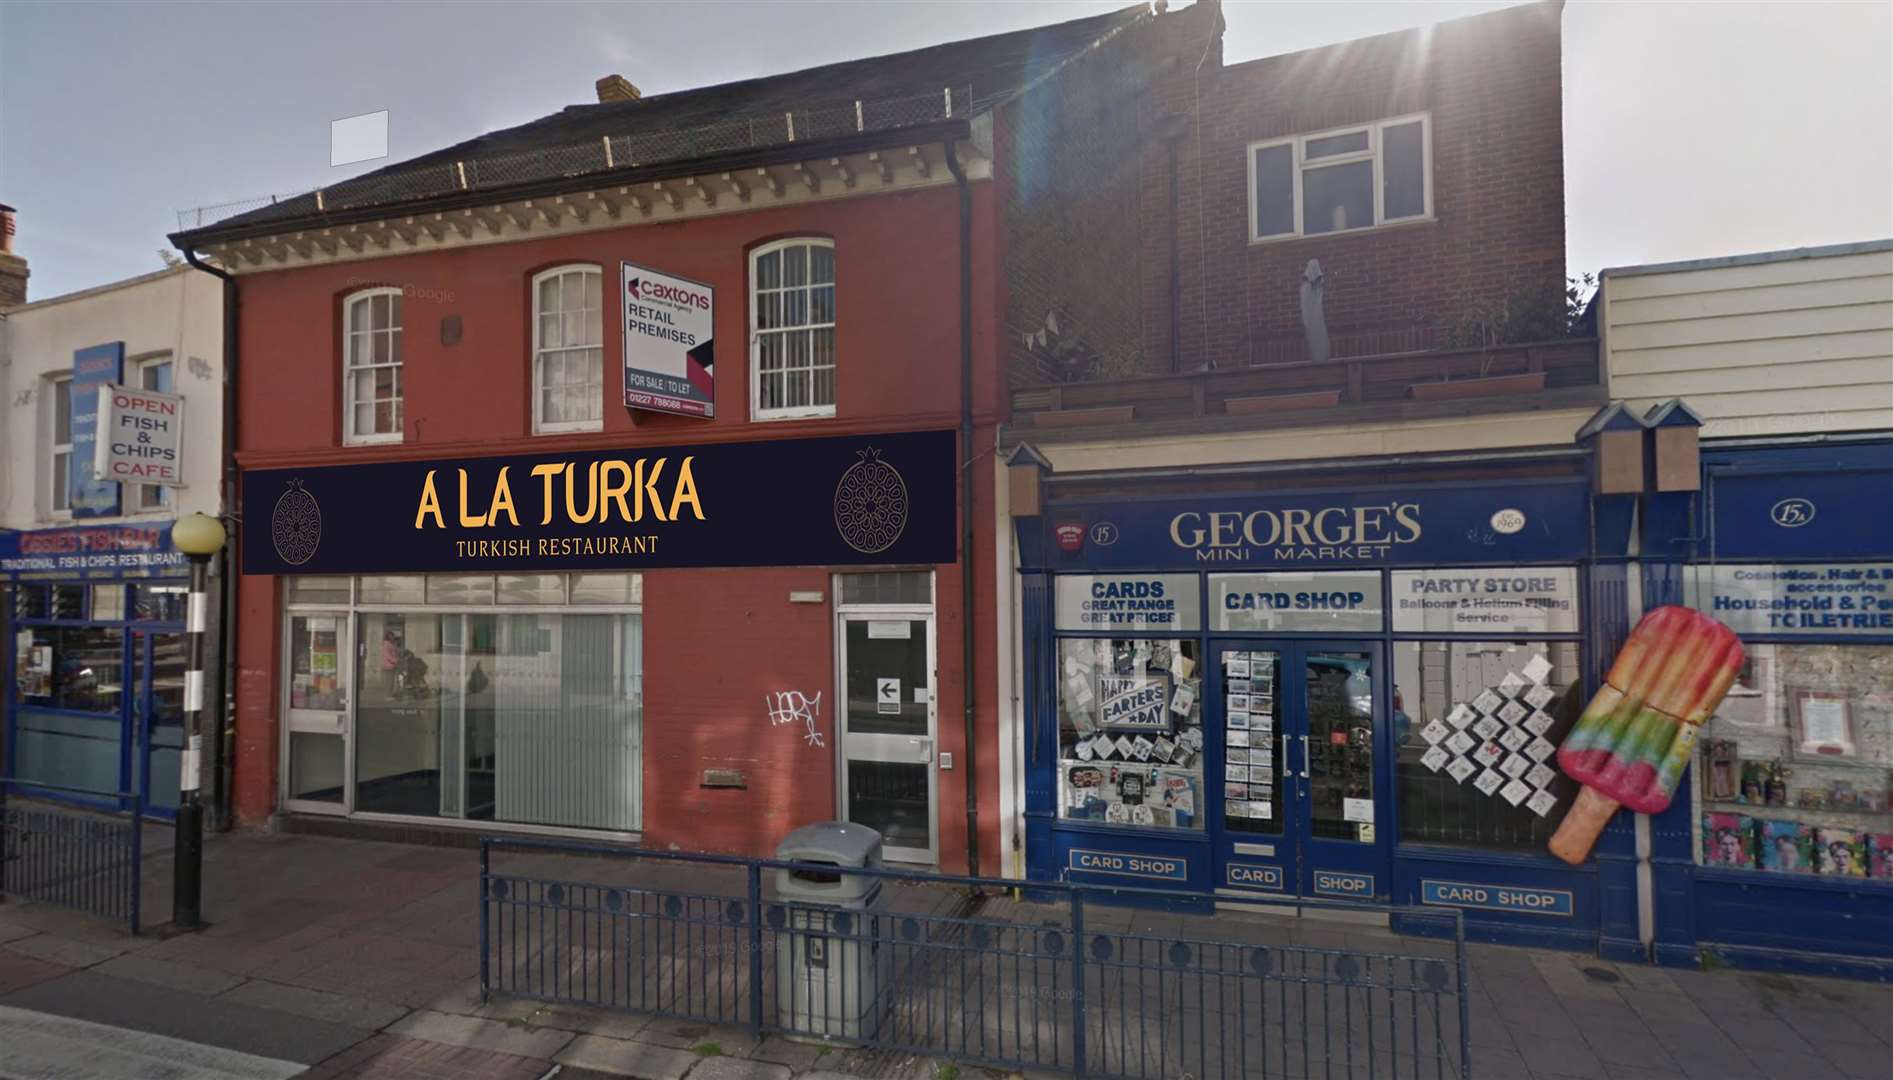 How the A La Turka restaurant is set to look in Whitstable